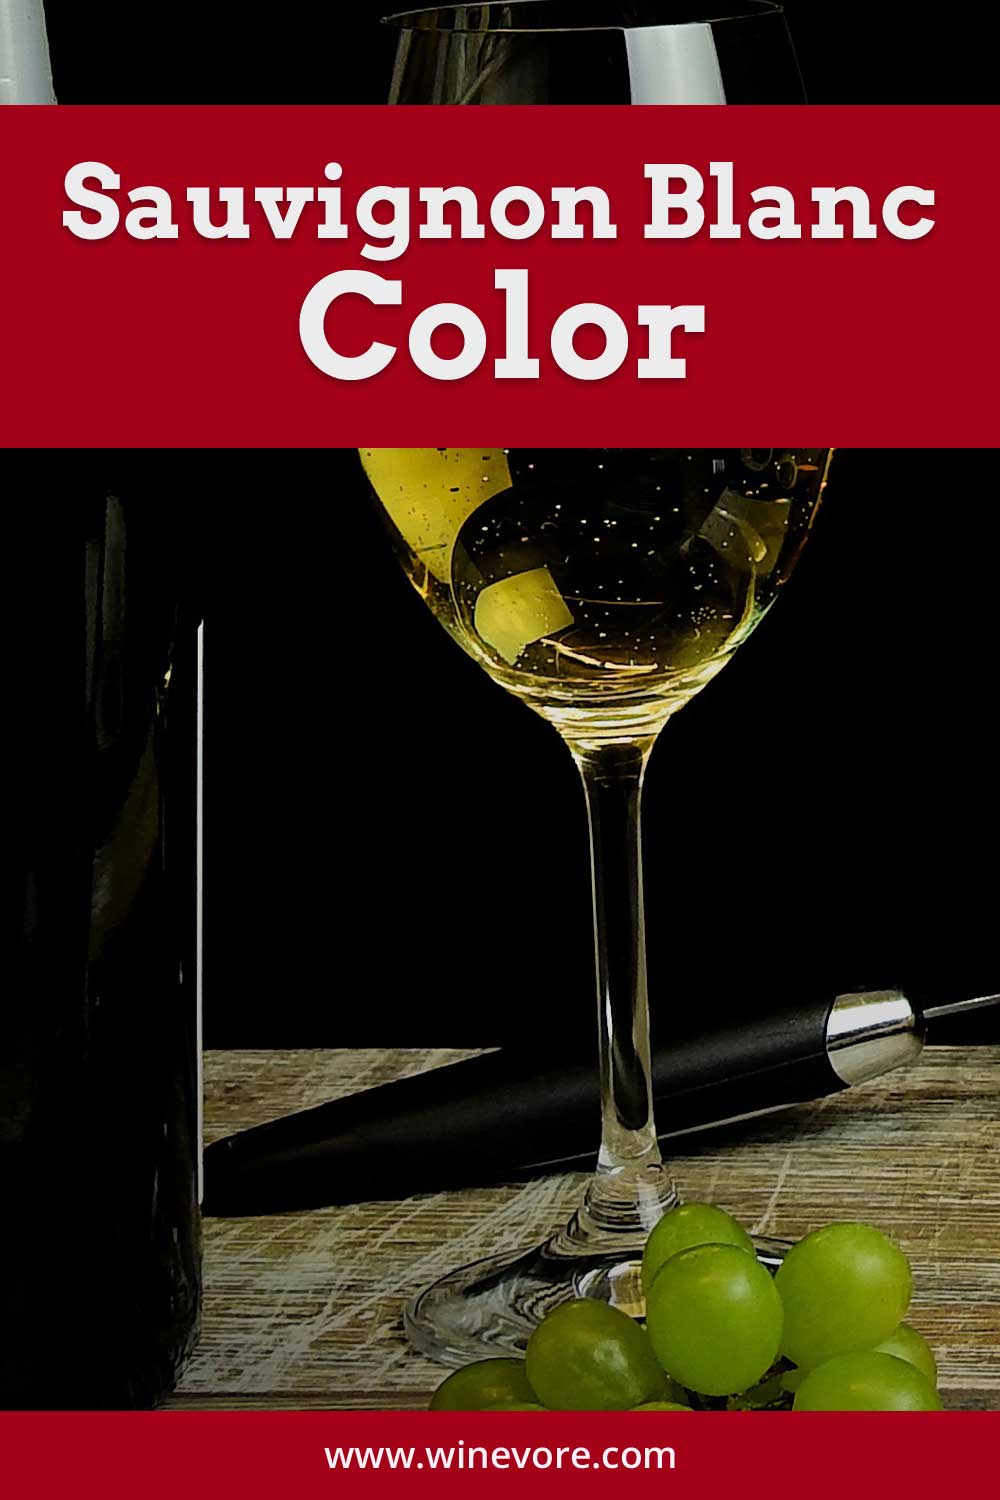 Wine glass full of white wine on wooden surface, a wine bottle and grapes beside it - Sauvignon Blanc Color.